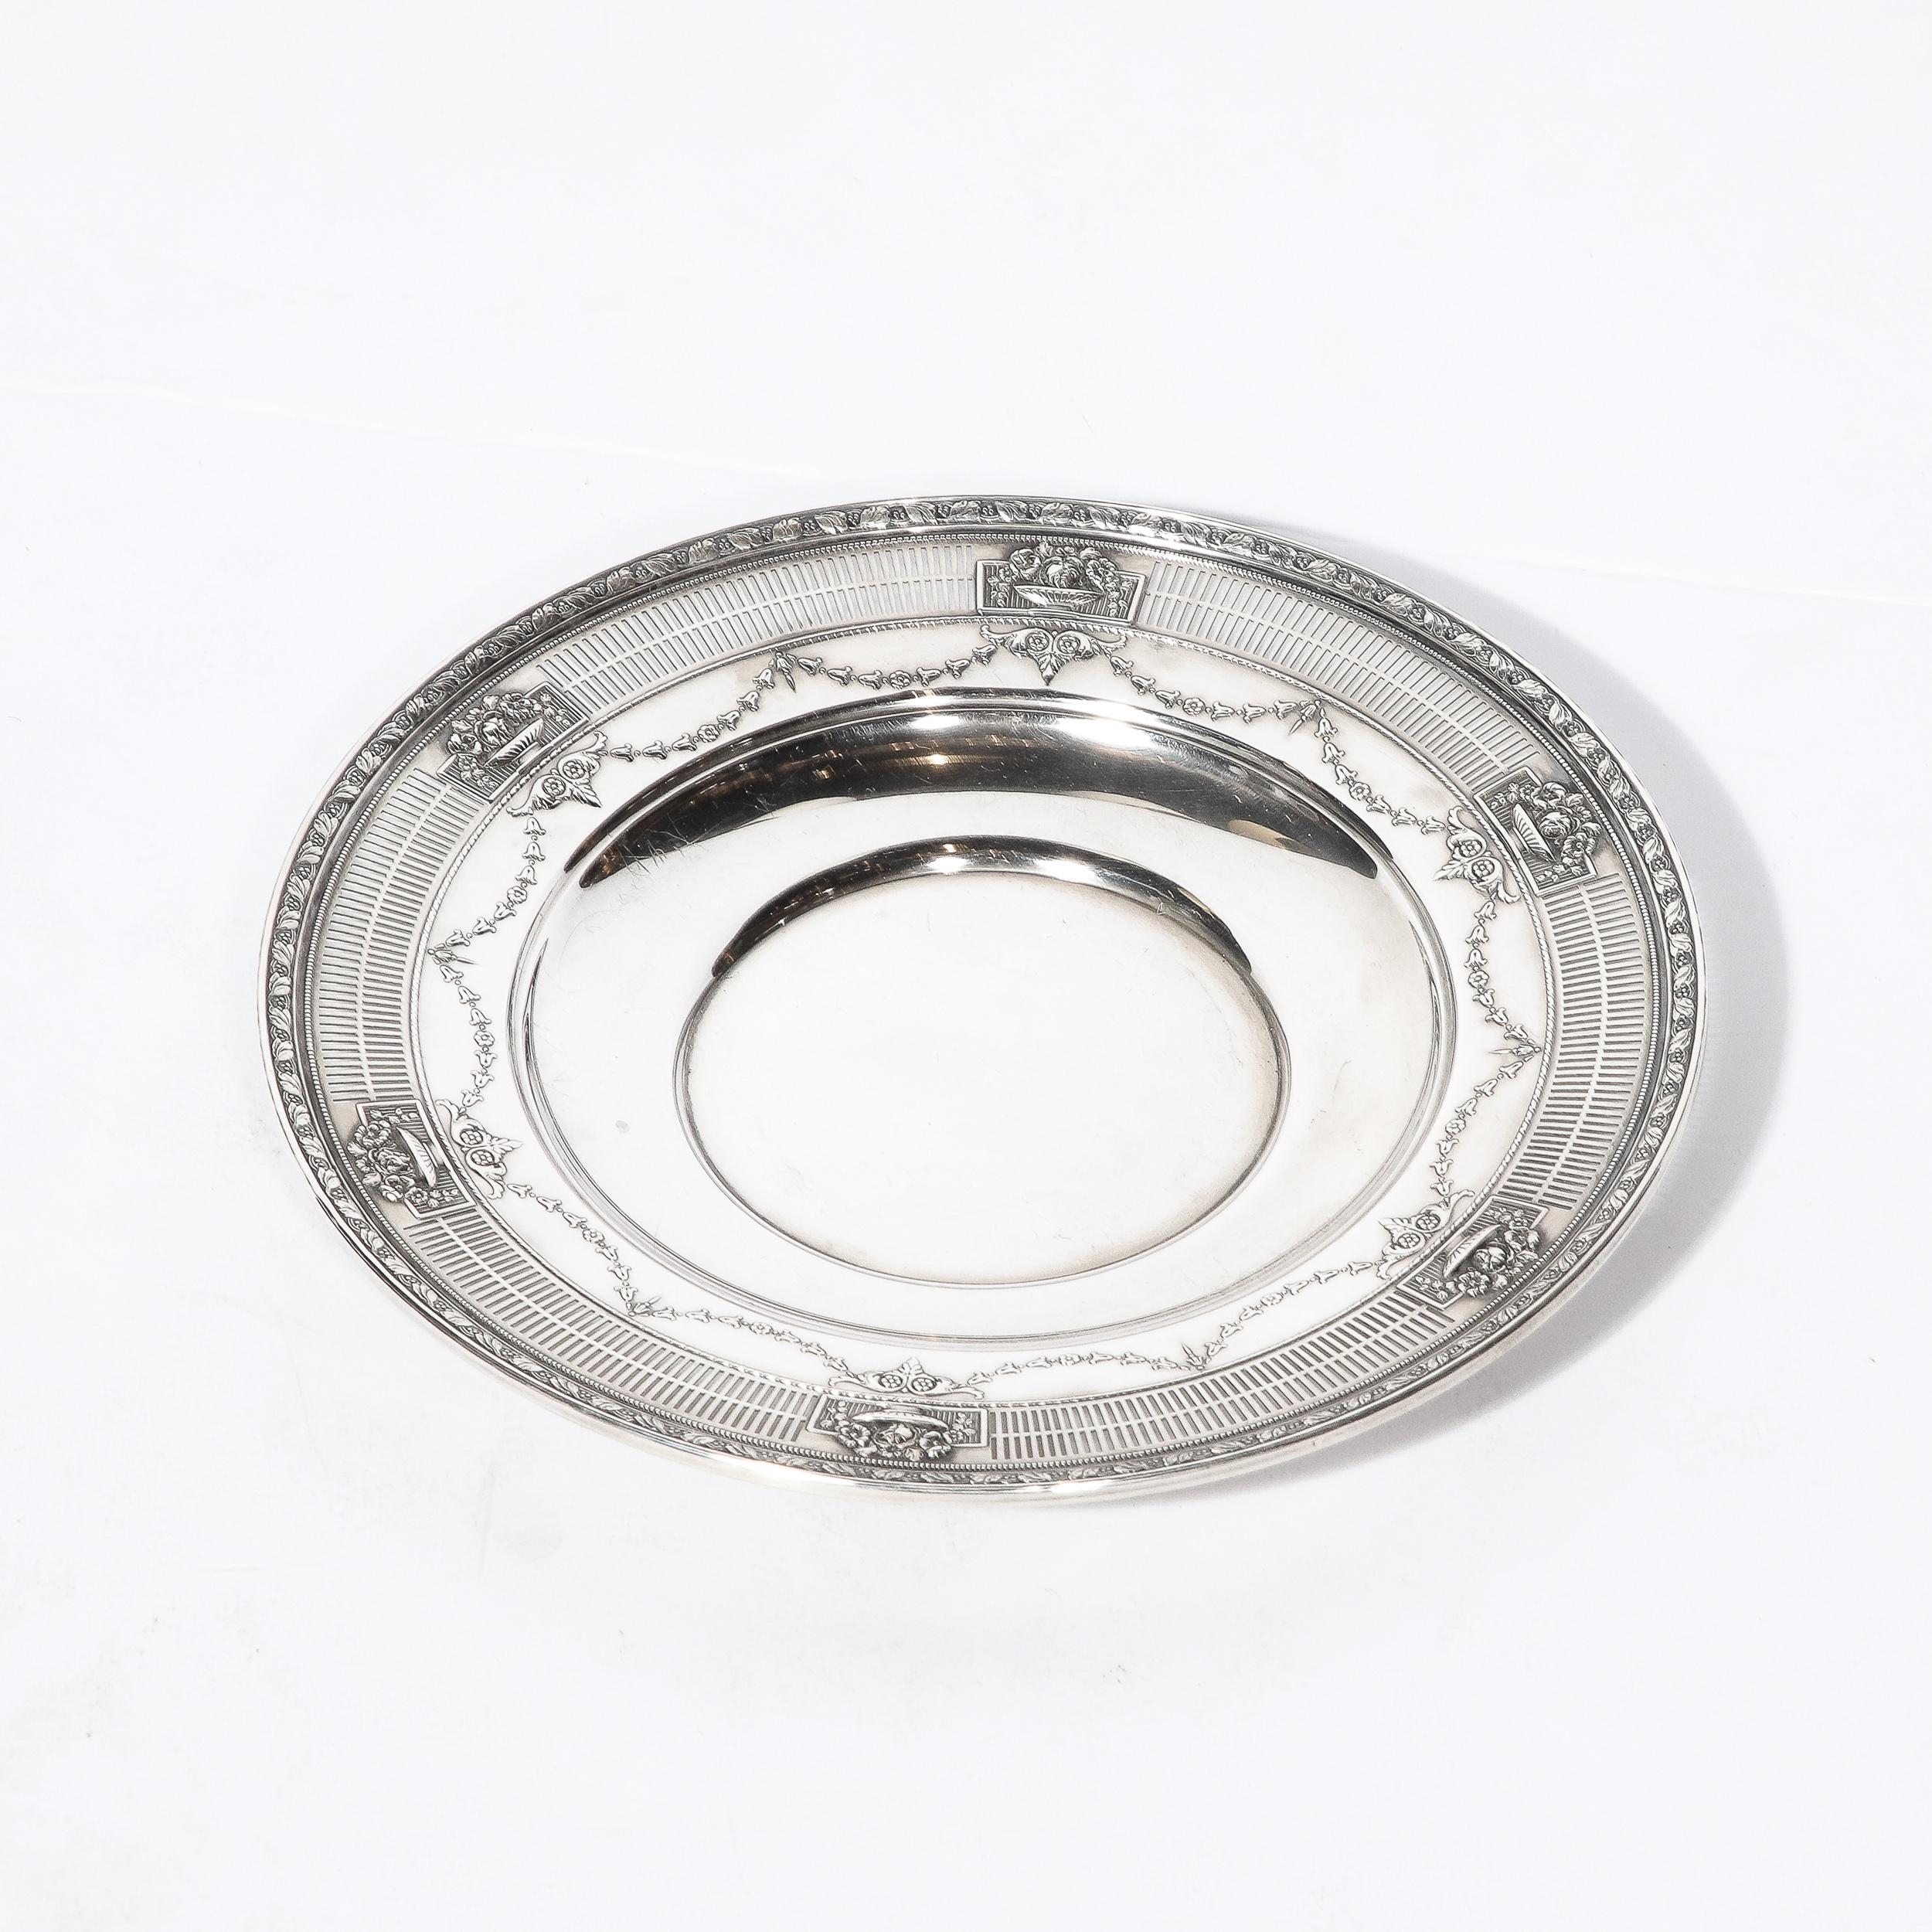 This remarkably detailed and refined Art Deco Sterling Silver Serving Bowl was made by J.E. Caldwell and originates from the United States, Circa 1930. A truly gorgeous piece rendered in gleaming Sterling Silver, the bowl is adorned with